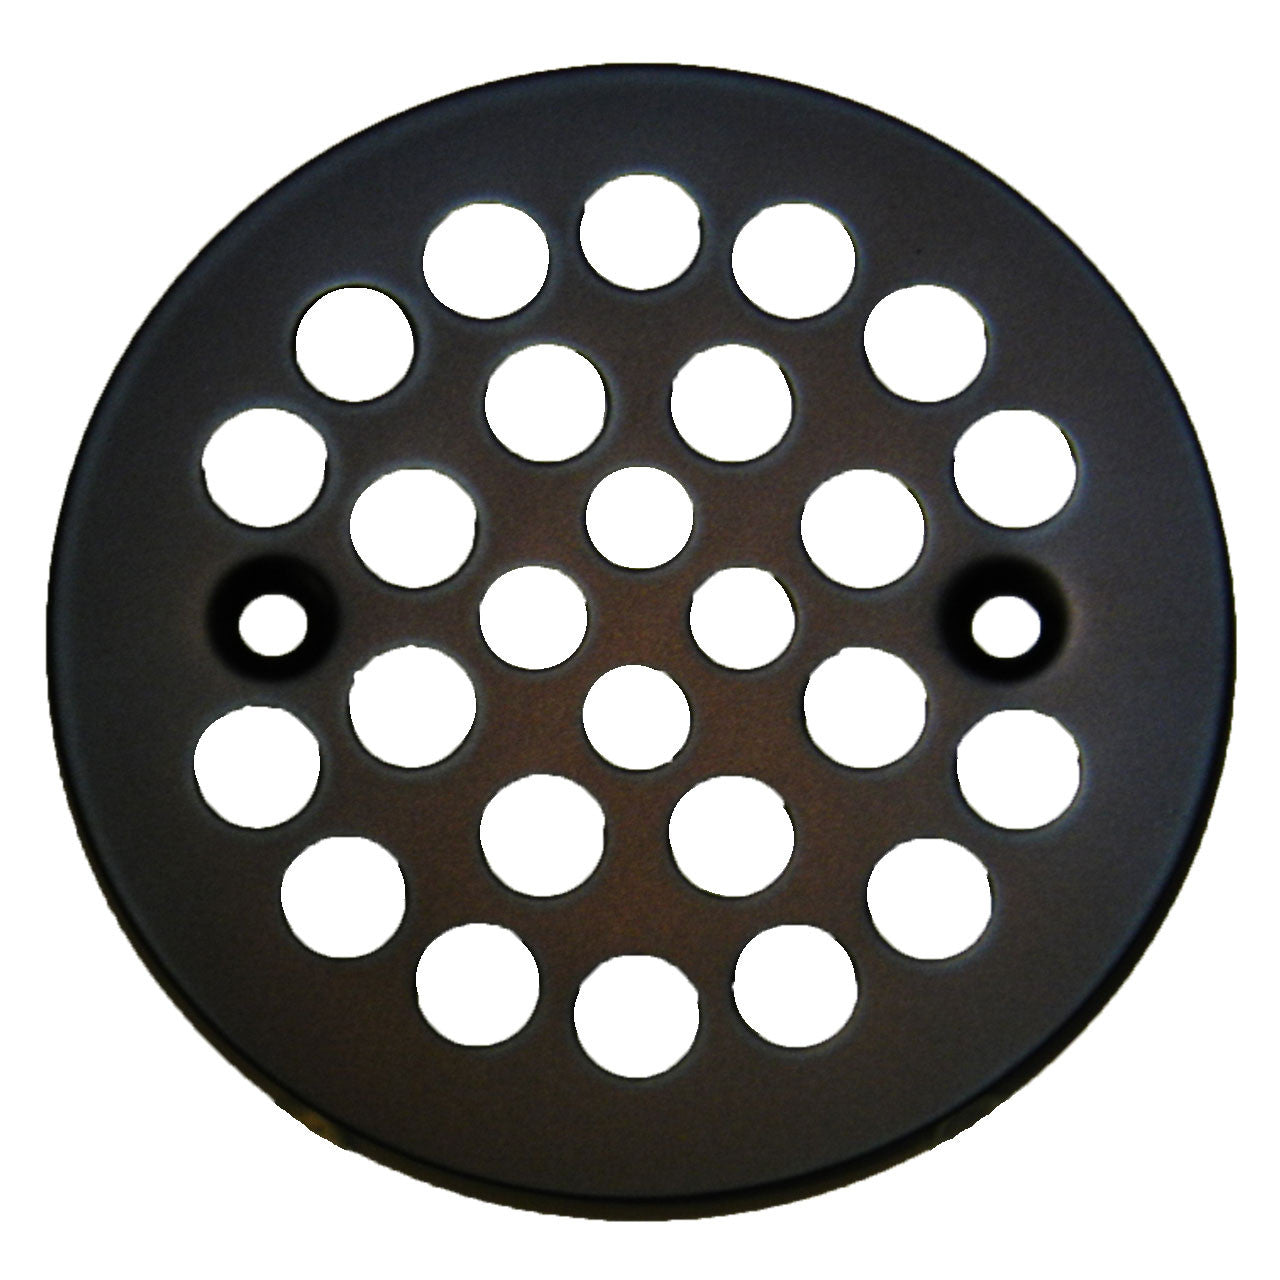 4-1/4" Oil Rubbed Bronze Stamped Strainer (SP12SORB-080434006175)